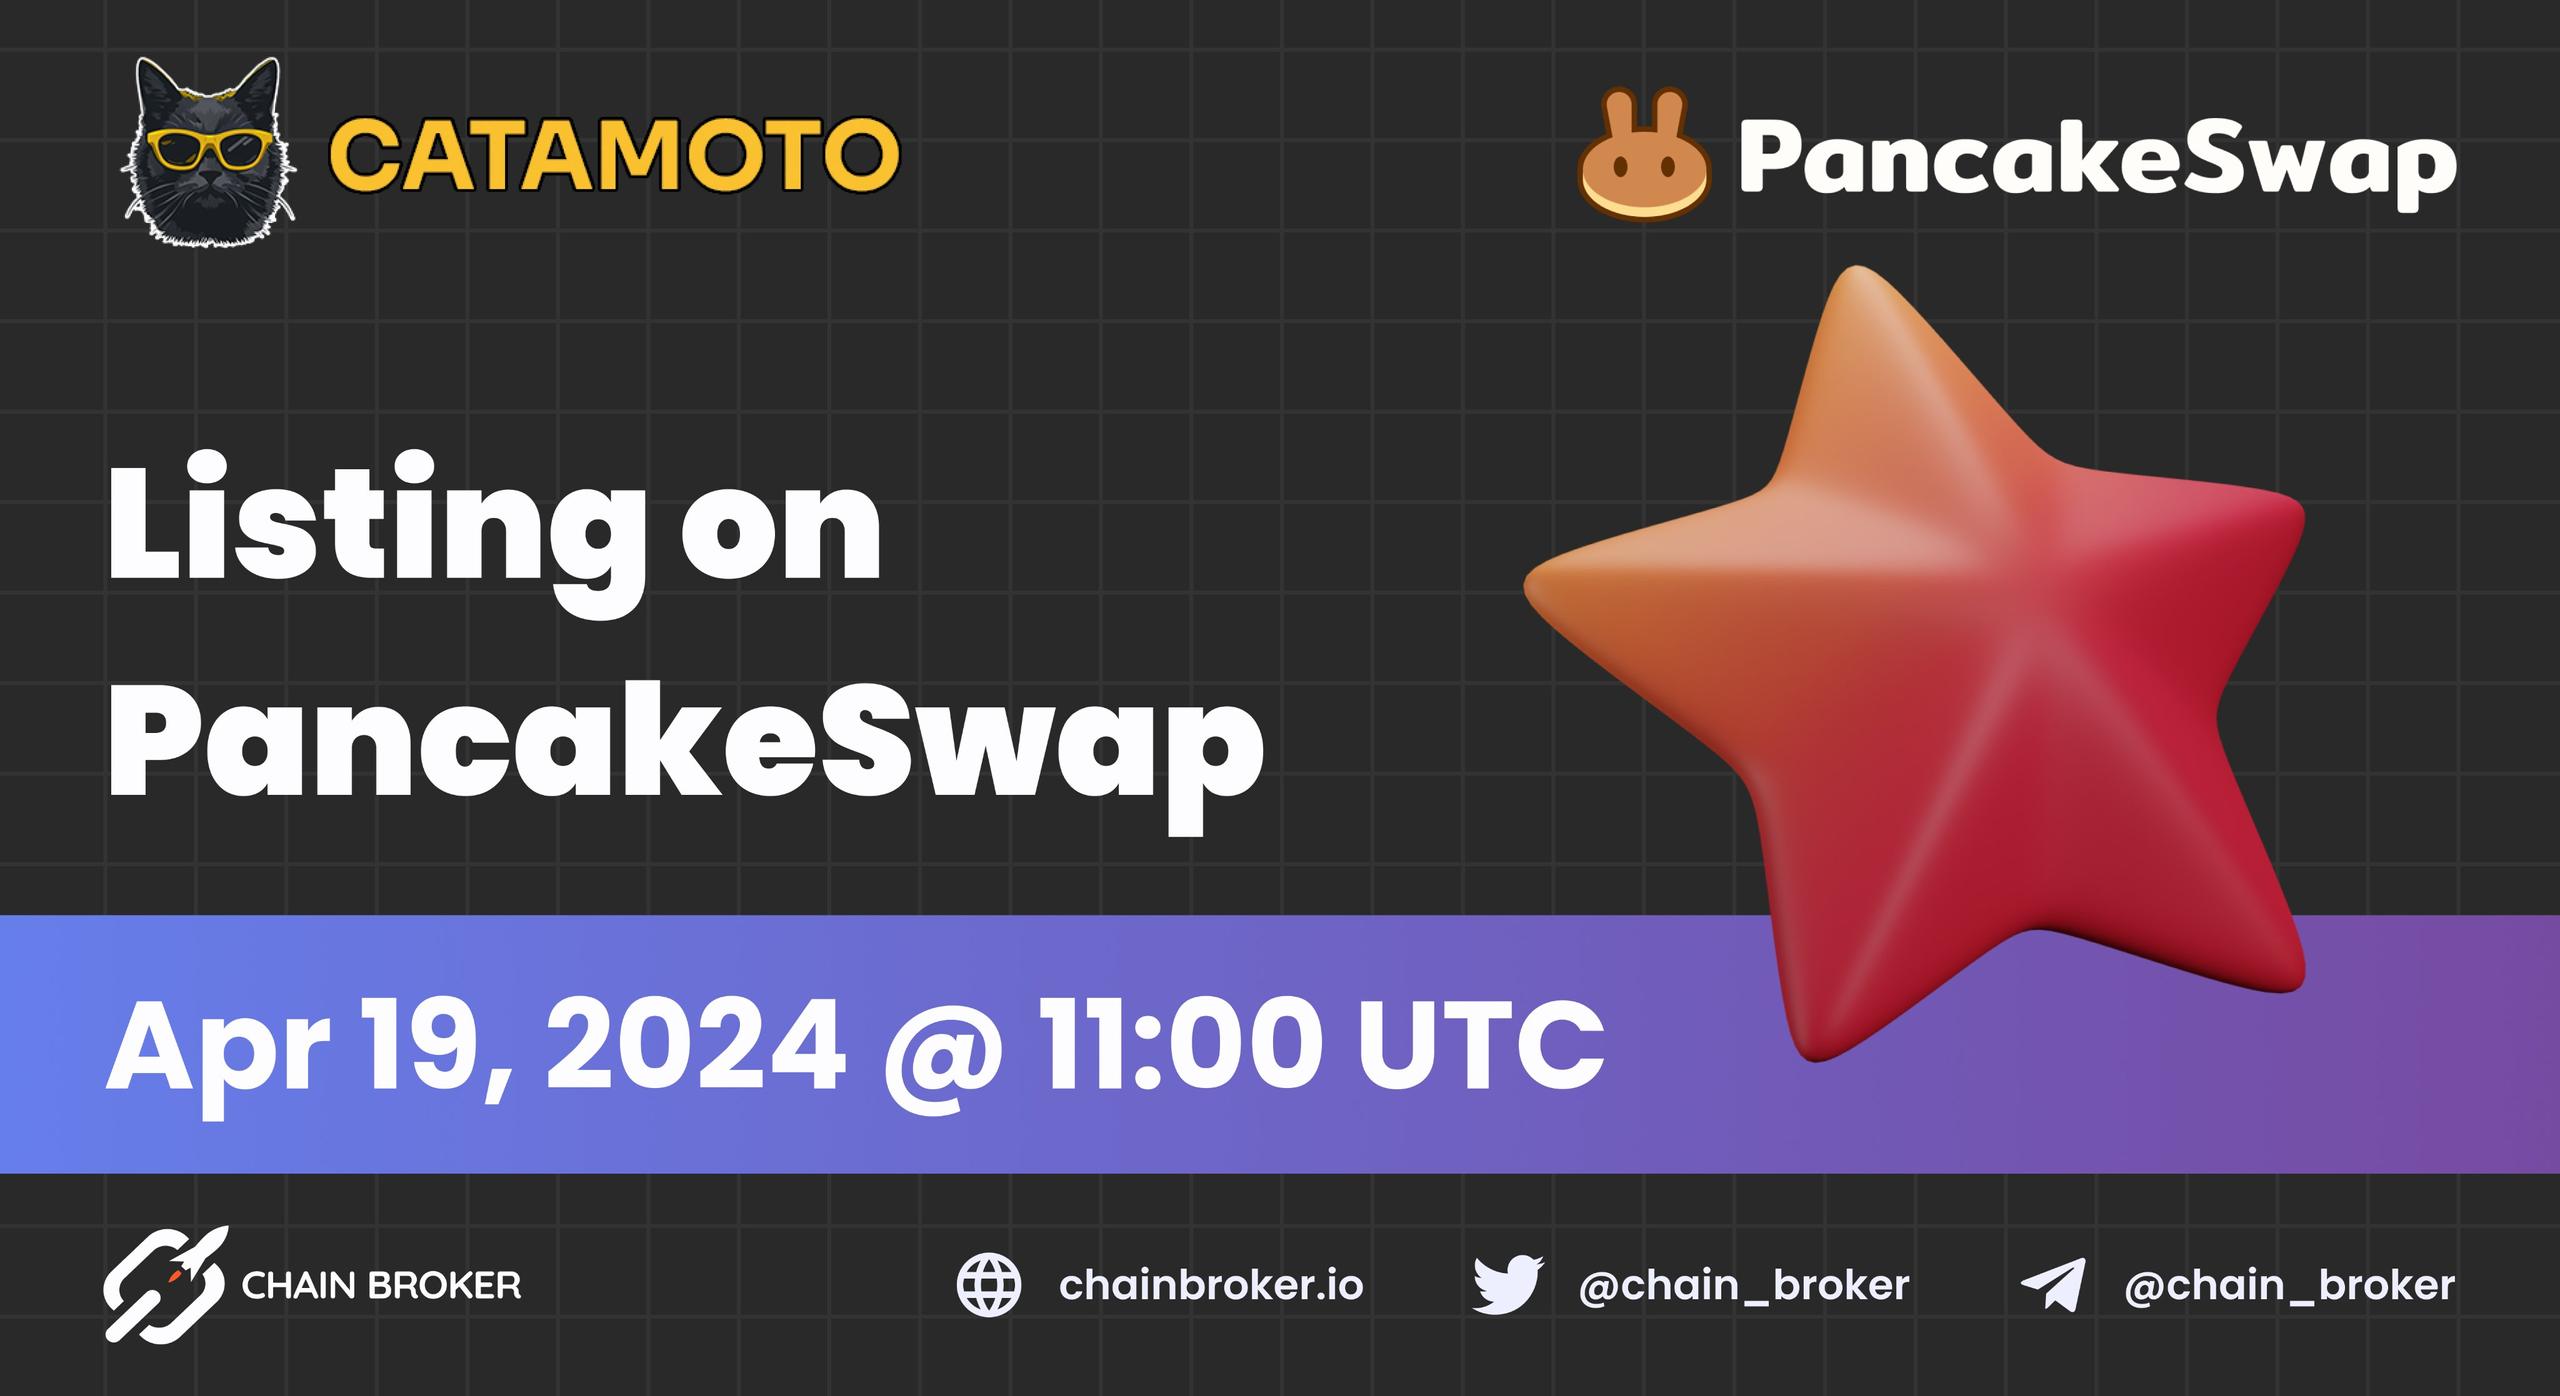 Catamoto will be Listed on PancakeSwap